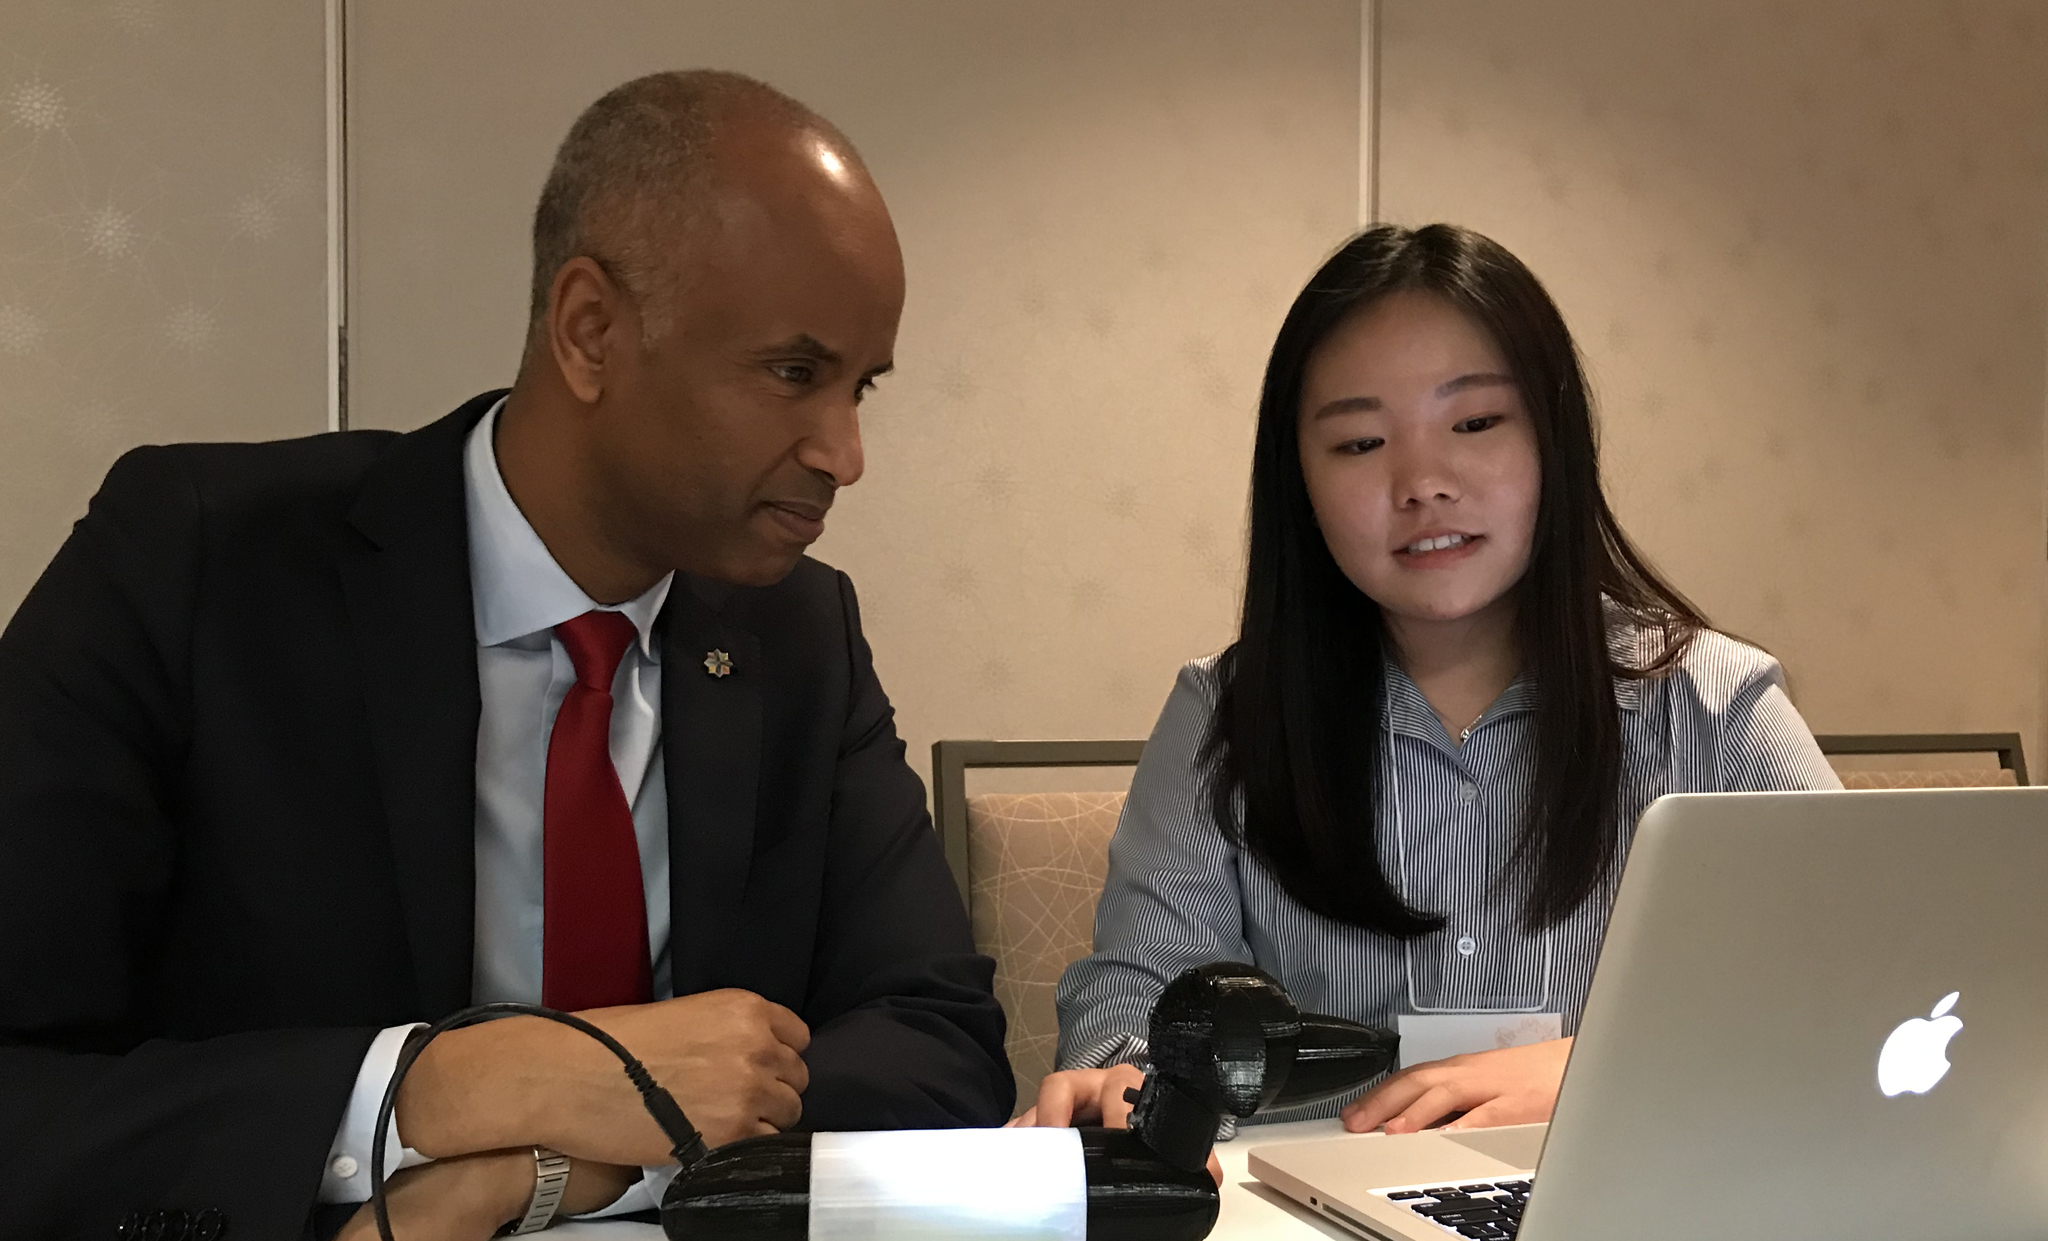 February 20, 2018 - The Honourable Ahmed D. Hussen, Minister of Immigration, Refugees and Citizenship and member of the Atlantic Growth Strategy Leadership Committee, listens intently to a presentation from a member of Riverview High School’s Engineering Brightness team February 20, 2018 in Moncton, N.B.